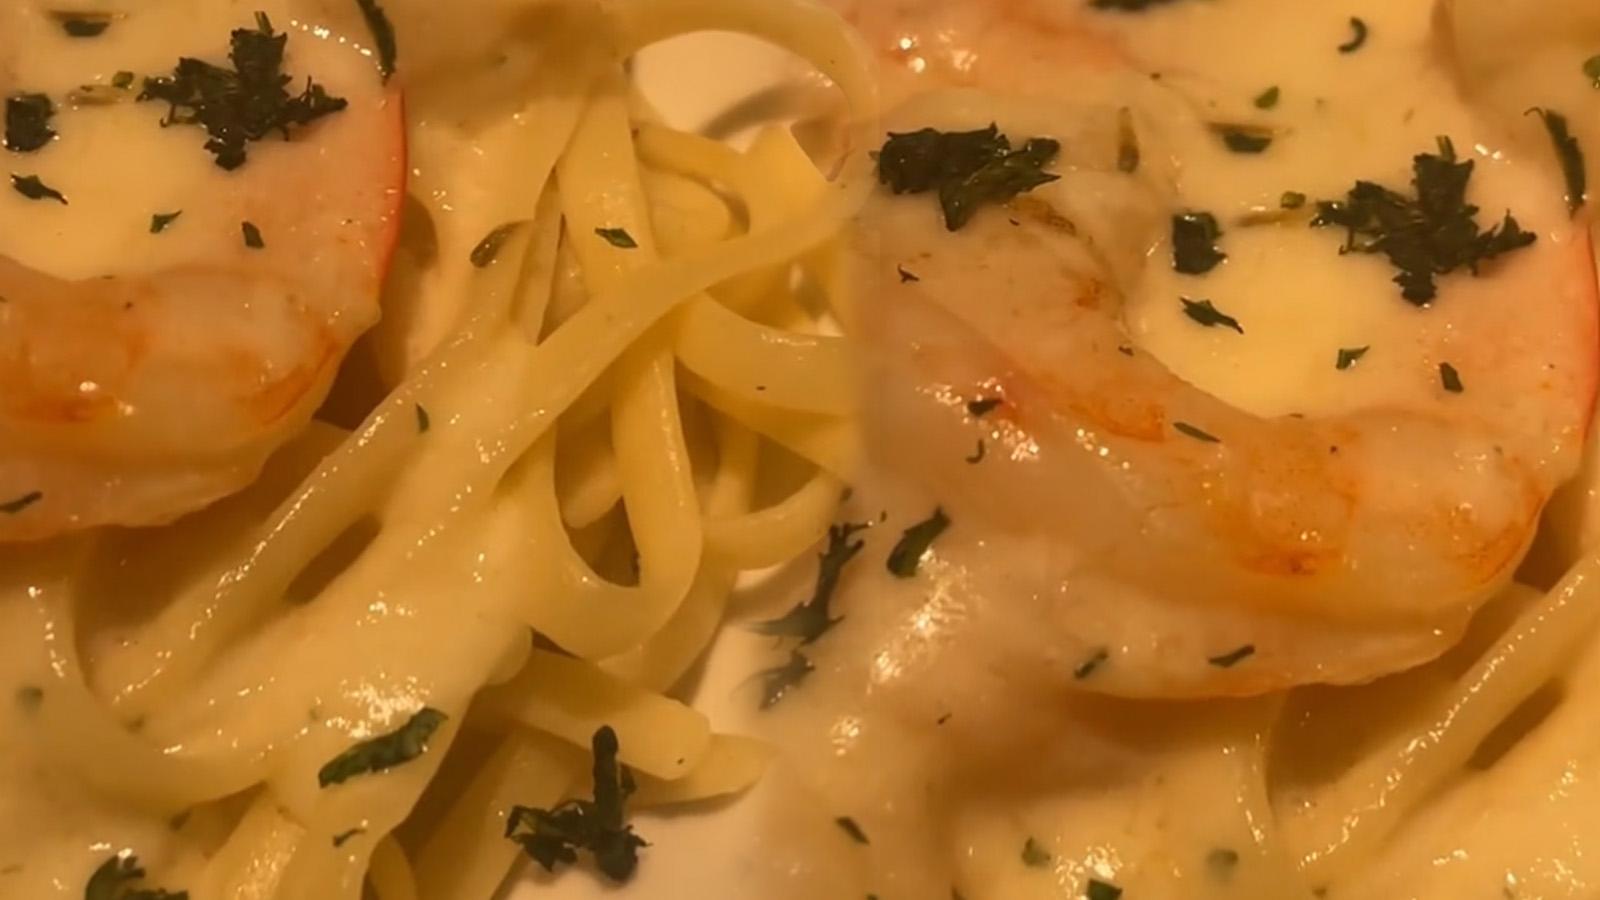 Woman mortified after finding live snails in her pasta at Red Lobster